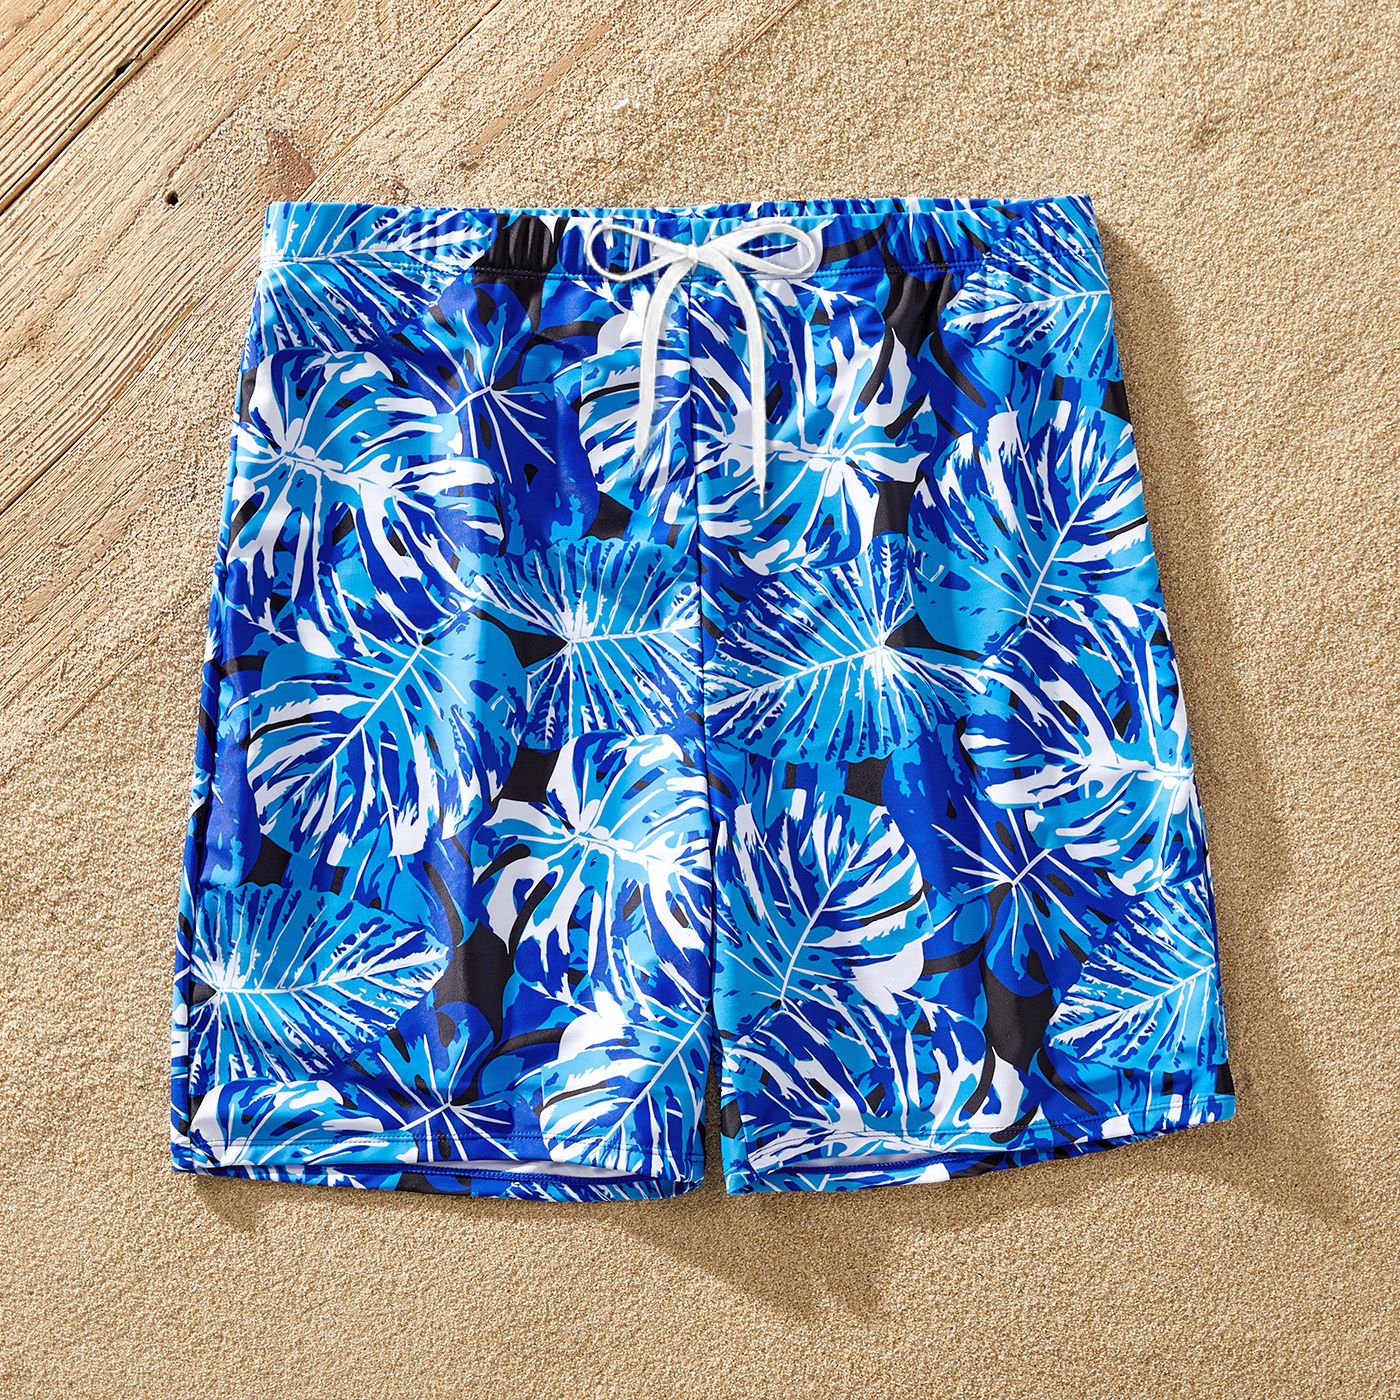 Family Matching Plant Print Ruffled Two-piece Swimsuit Or Swim Trunks Shorts